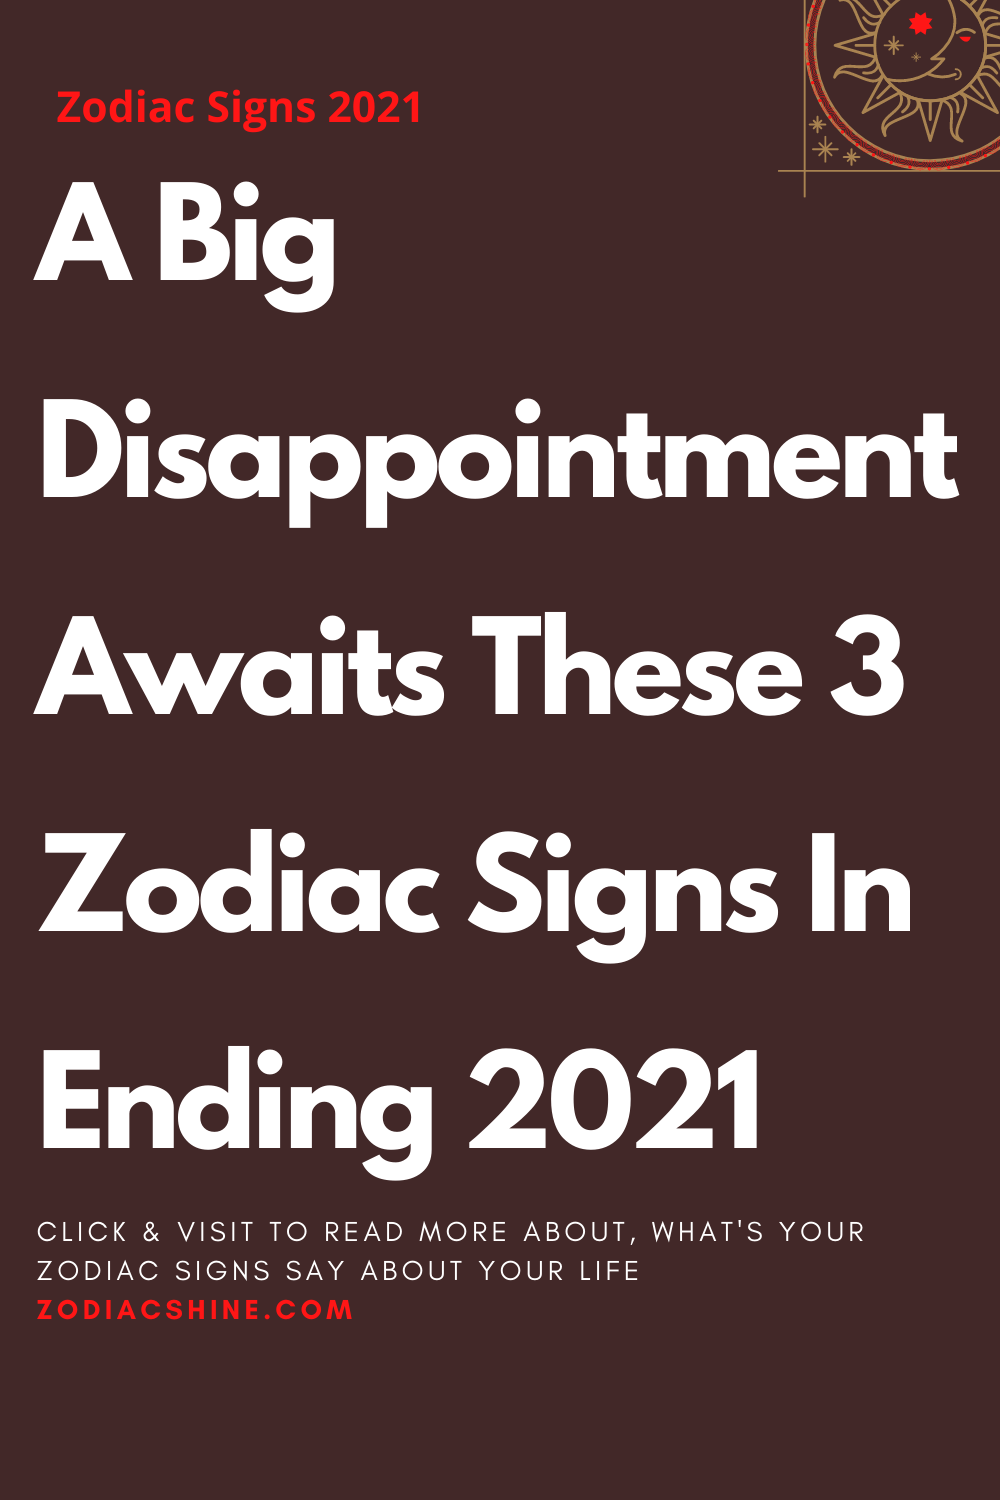 A Big Disappointment Awaits These 3 Zodiac Signs In Ending 2021